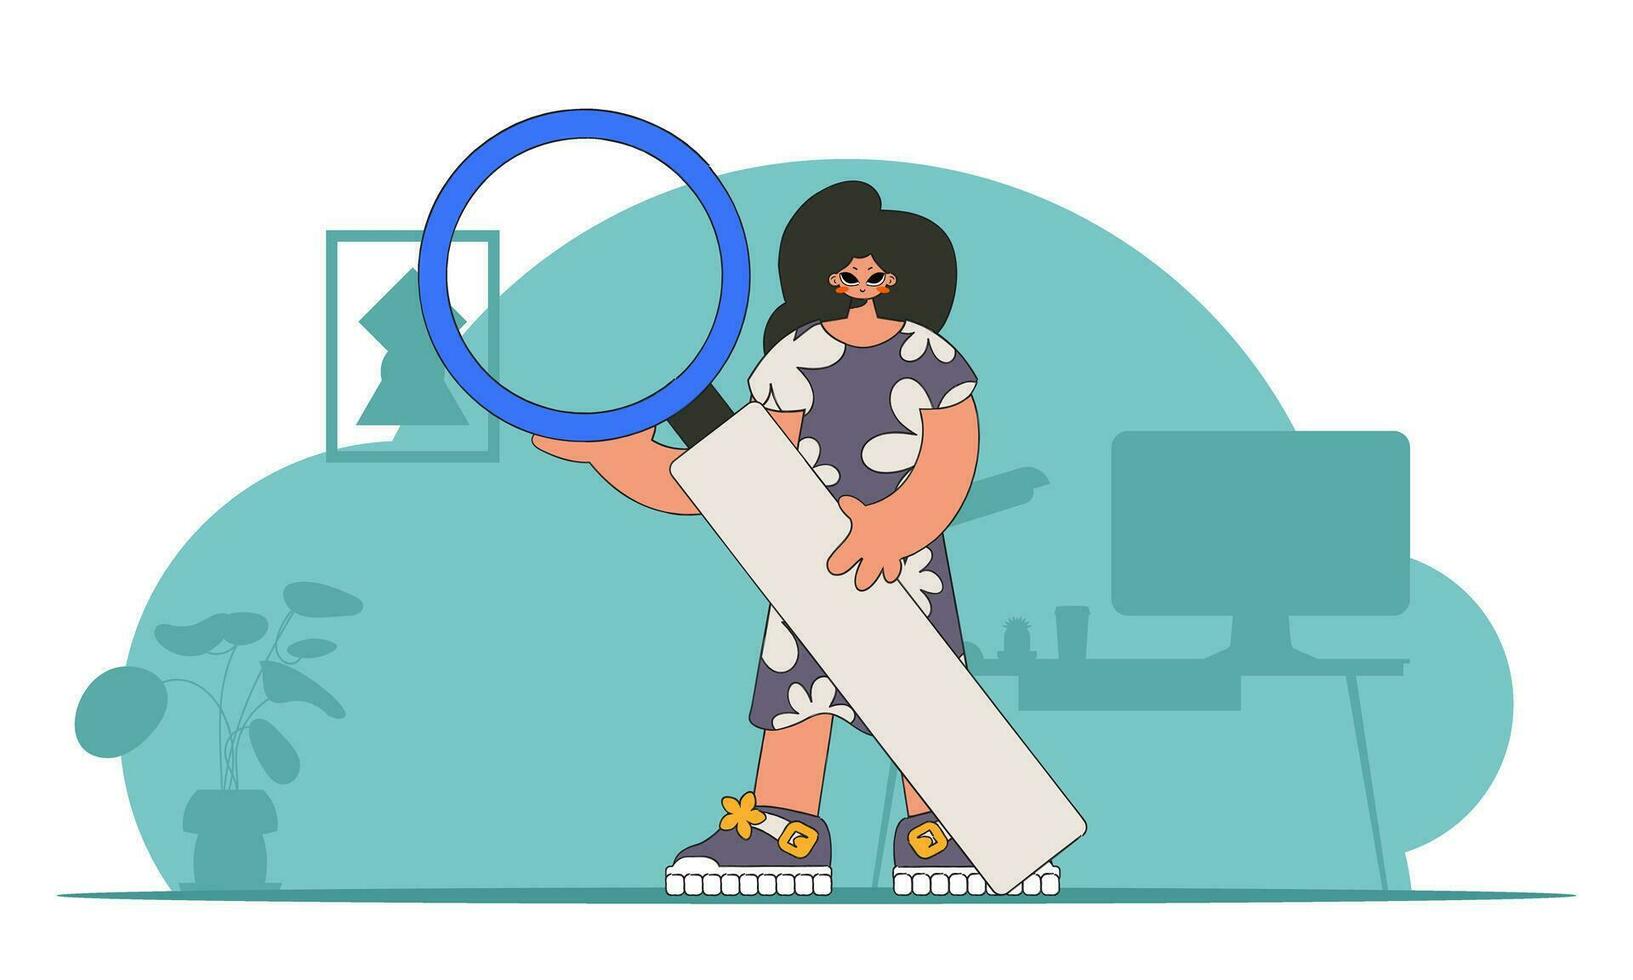 Concept Finding the necessary information on the Internet. The guy is holding a magnifying glass. Retro style character. vector